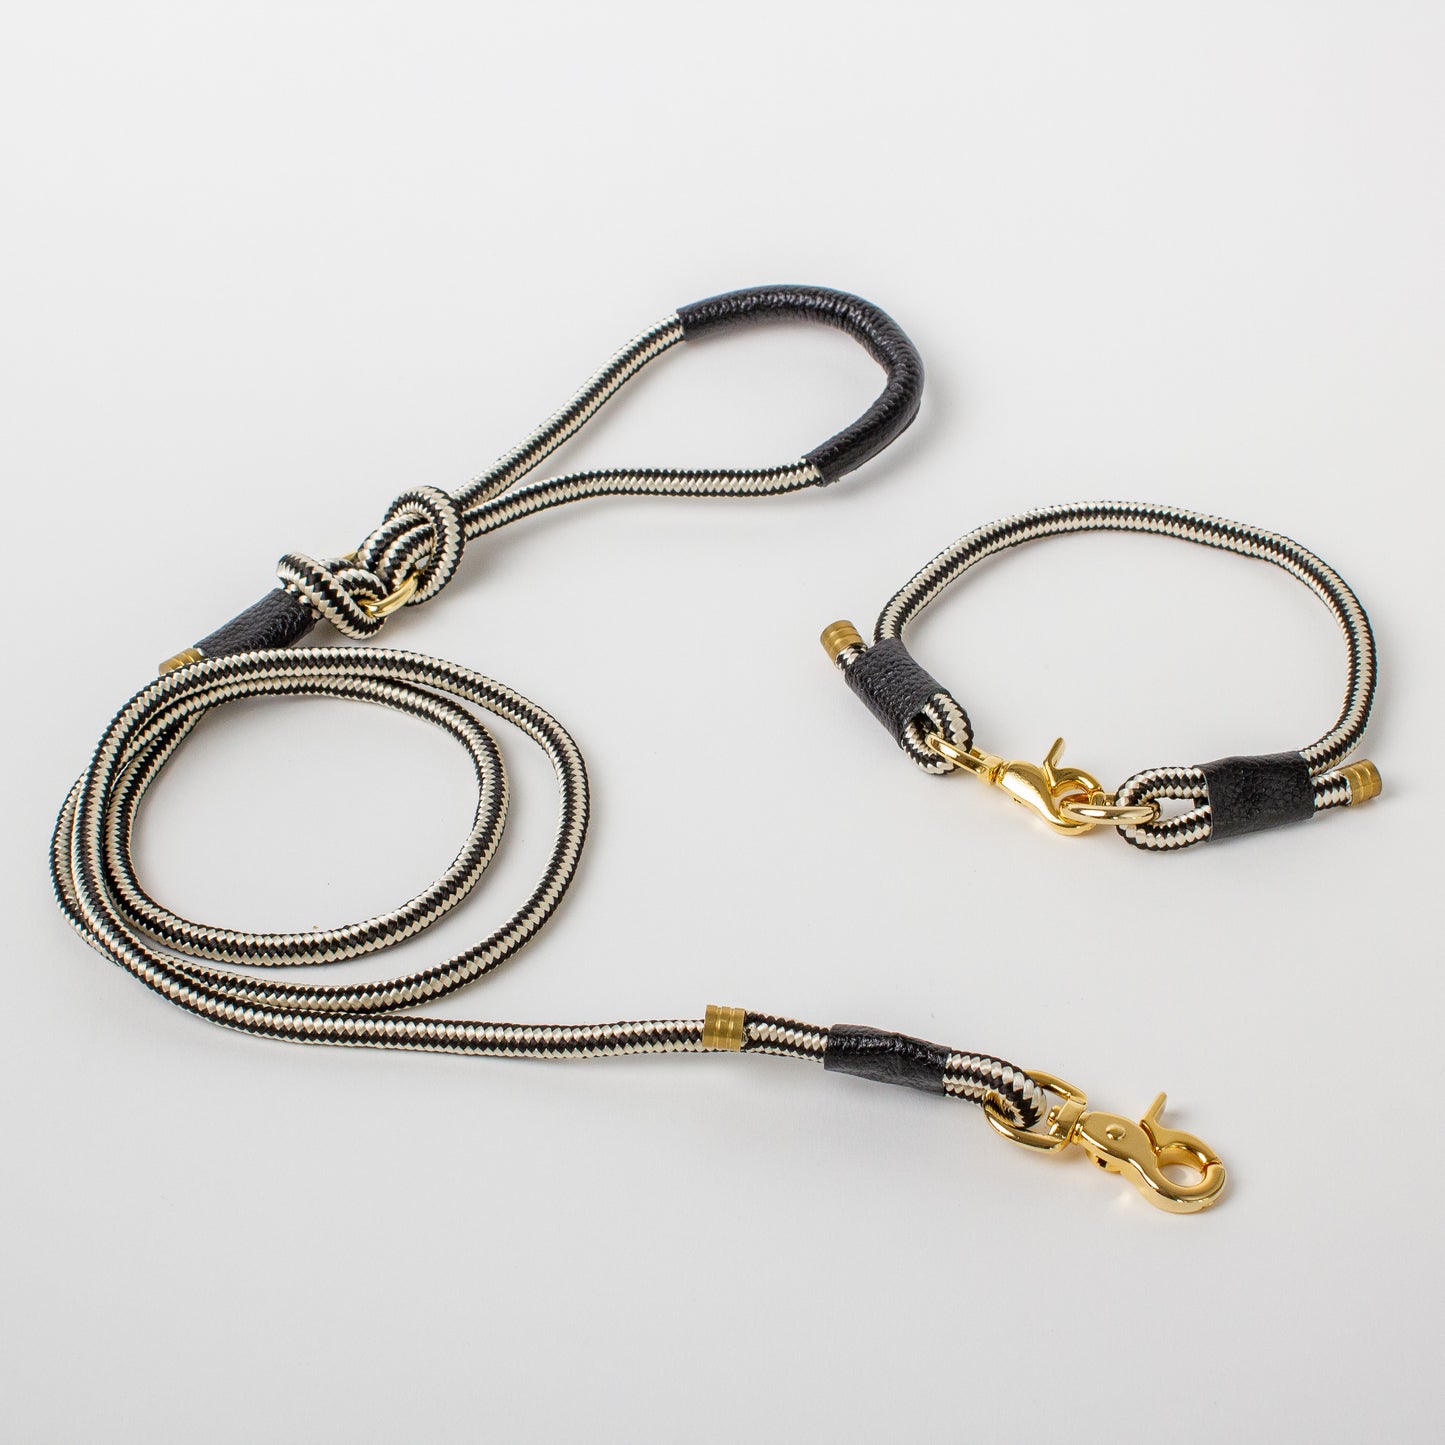 Willow Walks marine rope collar with leather details in black and white